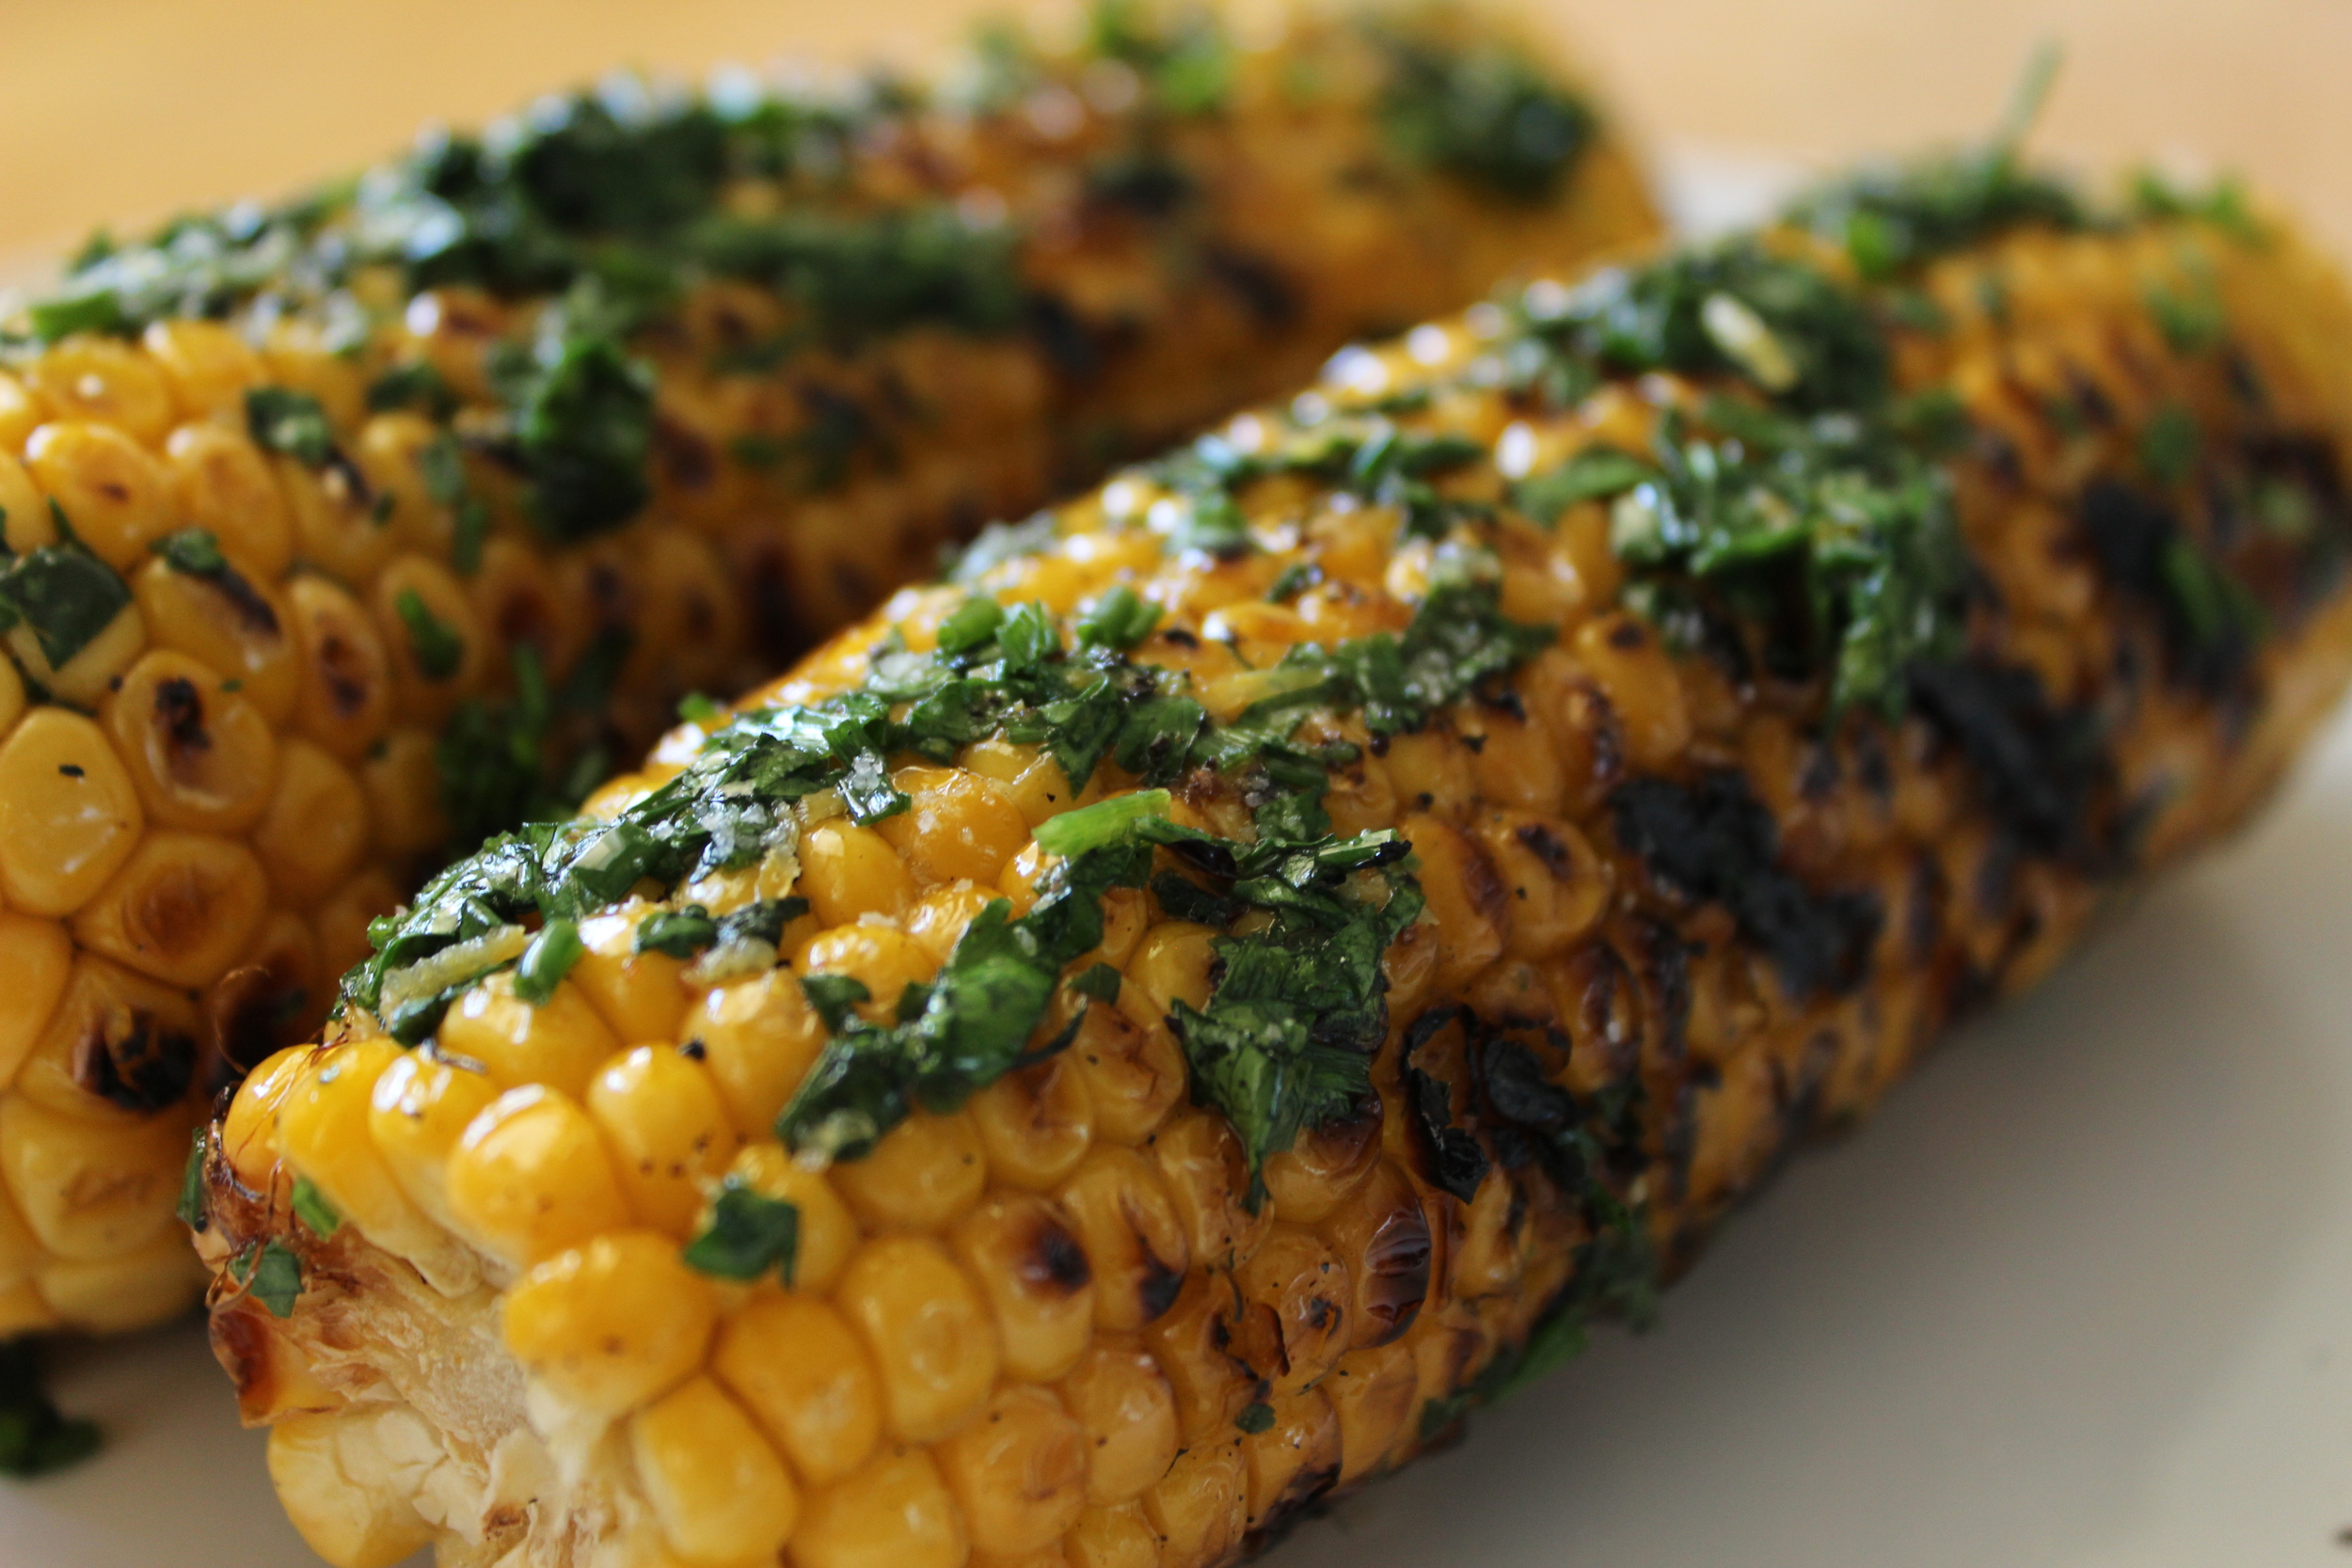 How To Grill The Perfect Corn On The Cob Indoors Brownble Vegan Online Courses,Wheat Pennies Value 1941